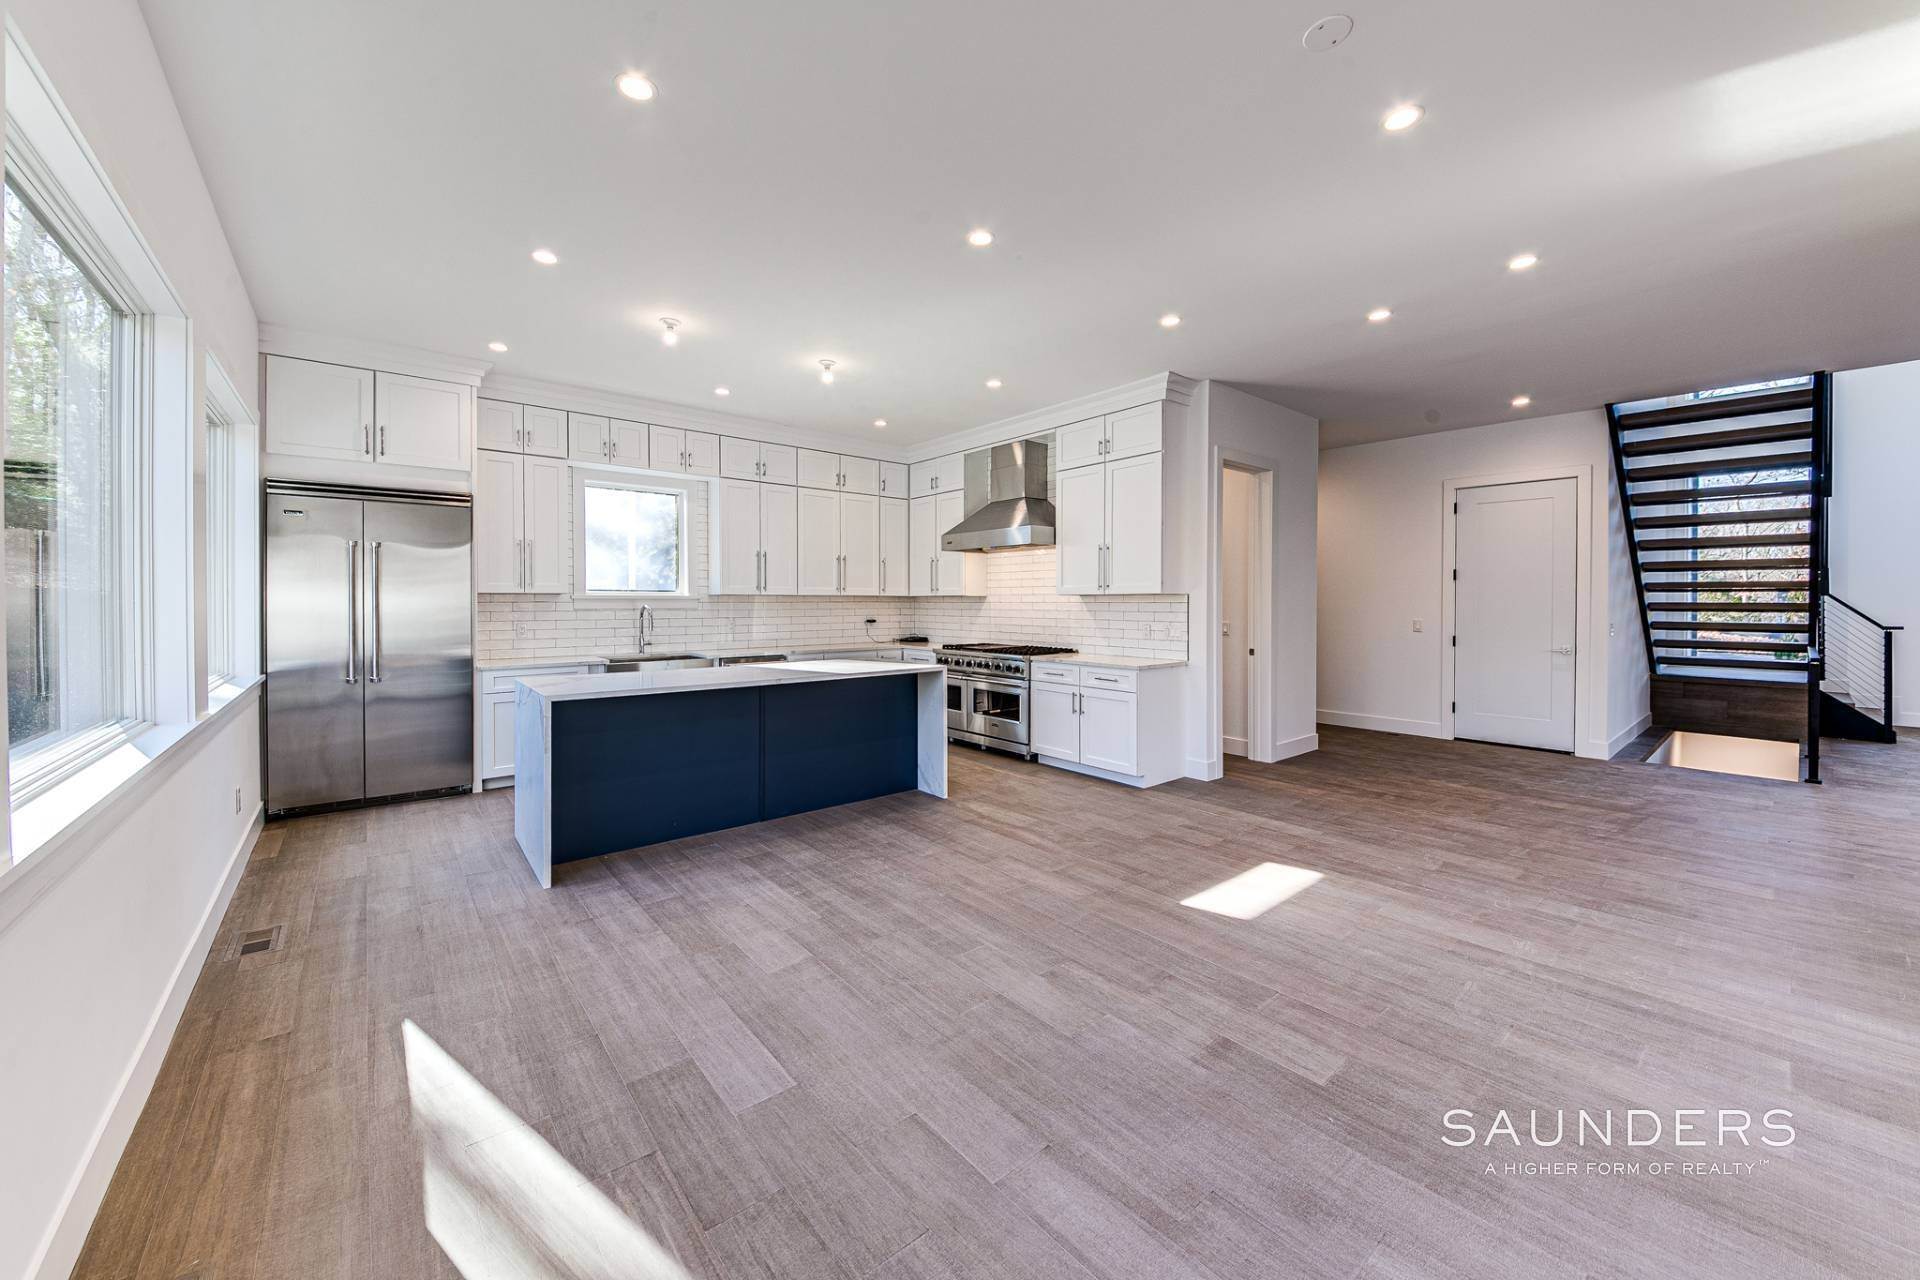 14. Single Family Homes for Sale at Unsurpassed Luxury And Elegance With This Brand New Construction 10 Van Scoys Path, East Hampton, NY 11937